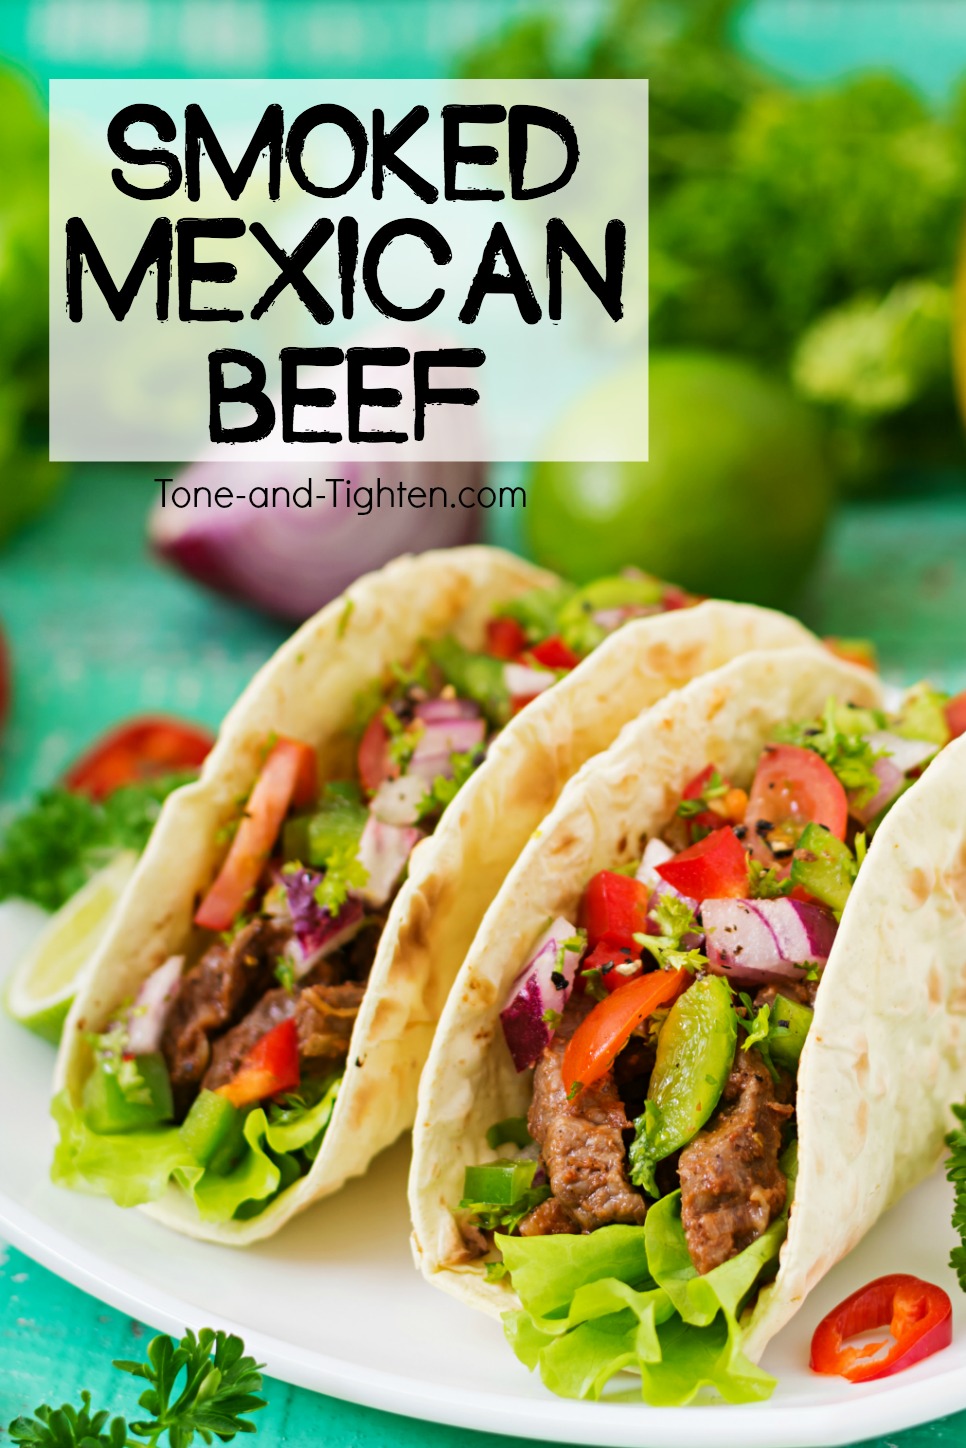 Smoked Mexican Beef Recipe